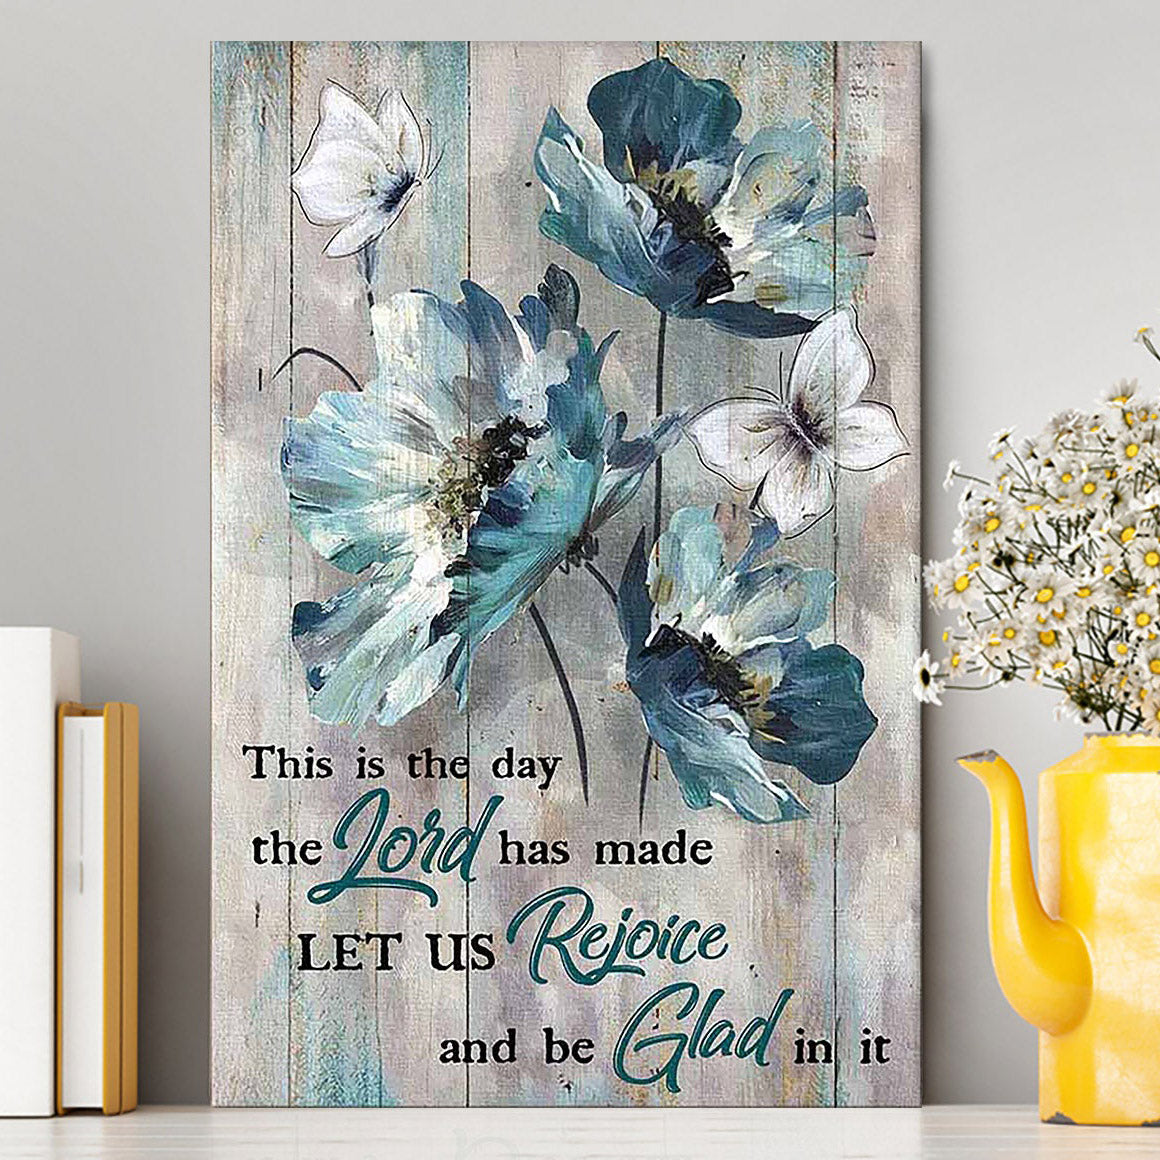 This Is The Day The Lord Has Made Blue Flower Butterfly Canvas Art - Christian Art - Bible Verse Wall Art - Religious Home Decor